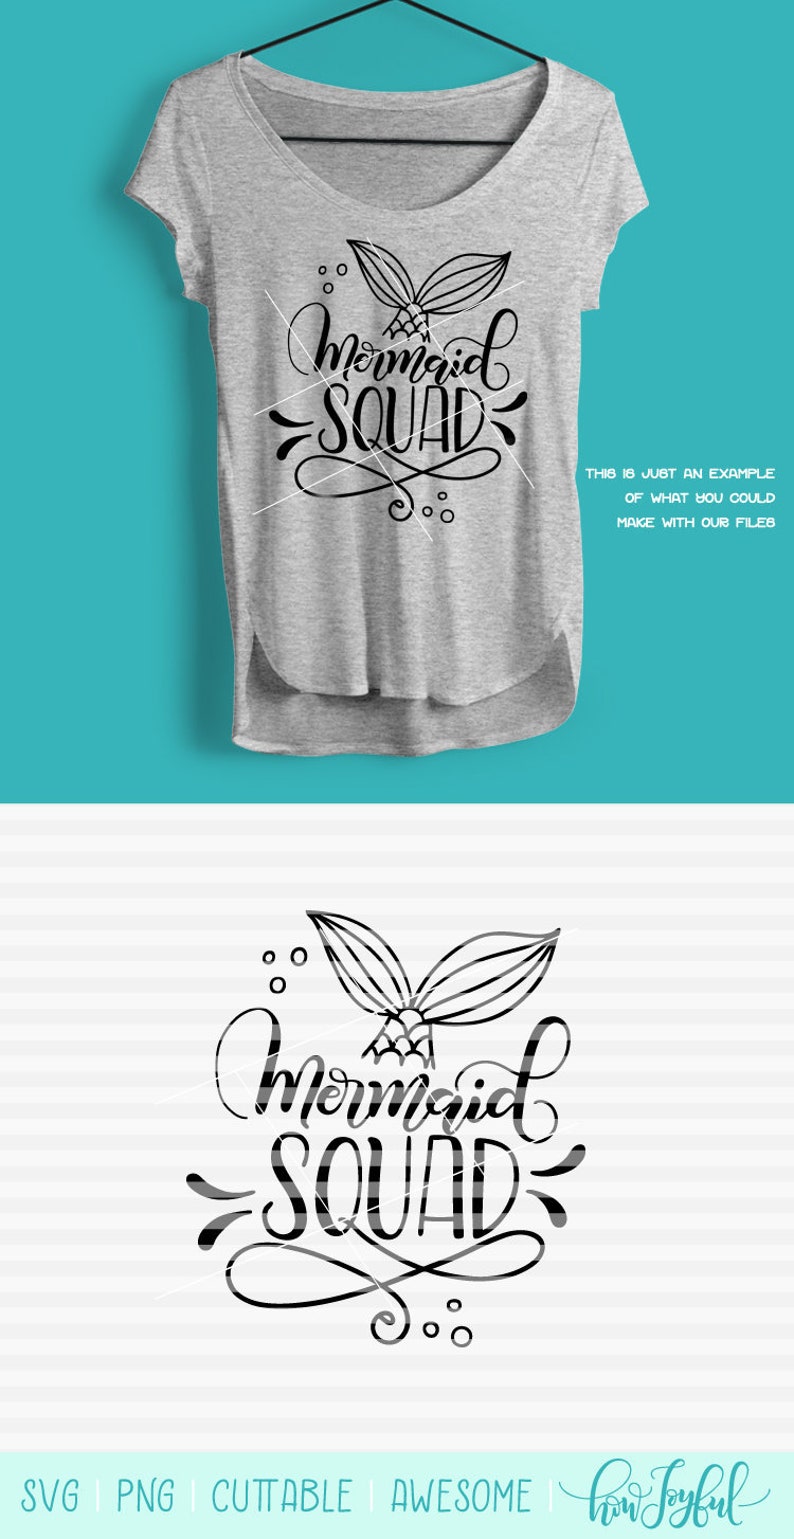 Download Mermaid squad SVG PDF DXF hand drawn lettered cut | Etsy